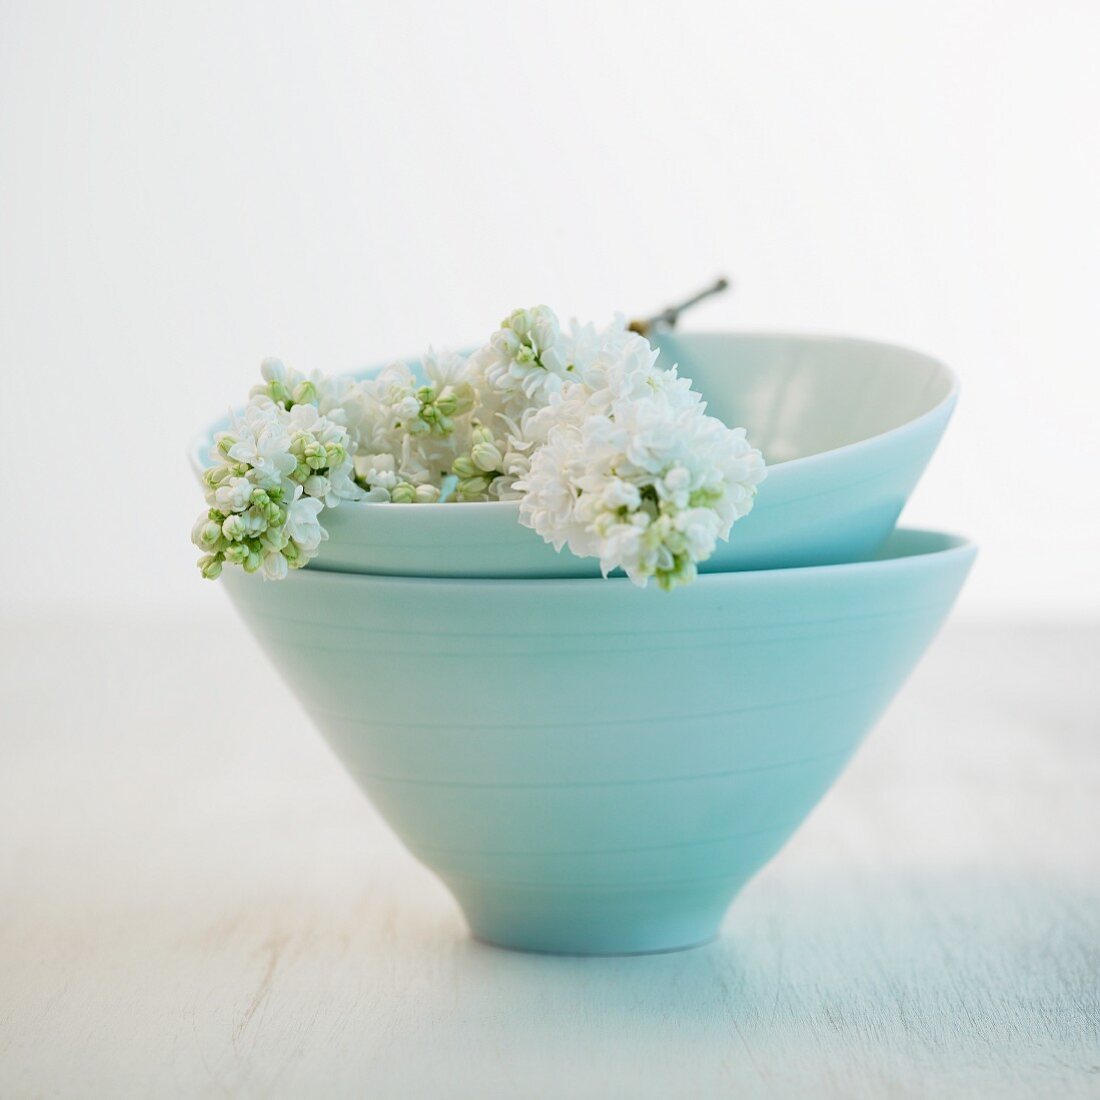 White lilac in pale blue ceramic bowls